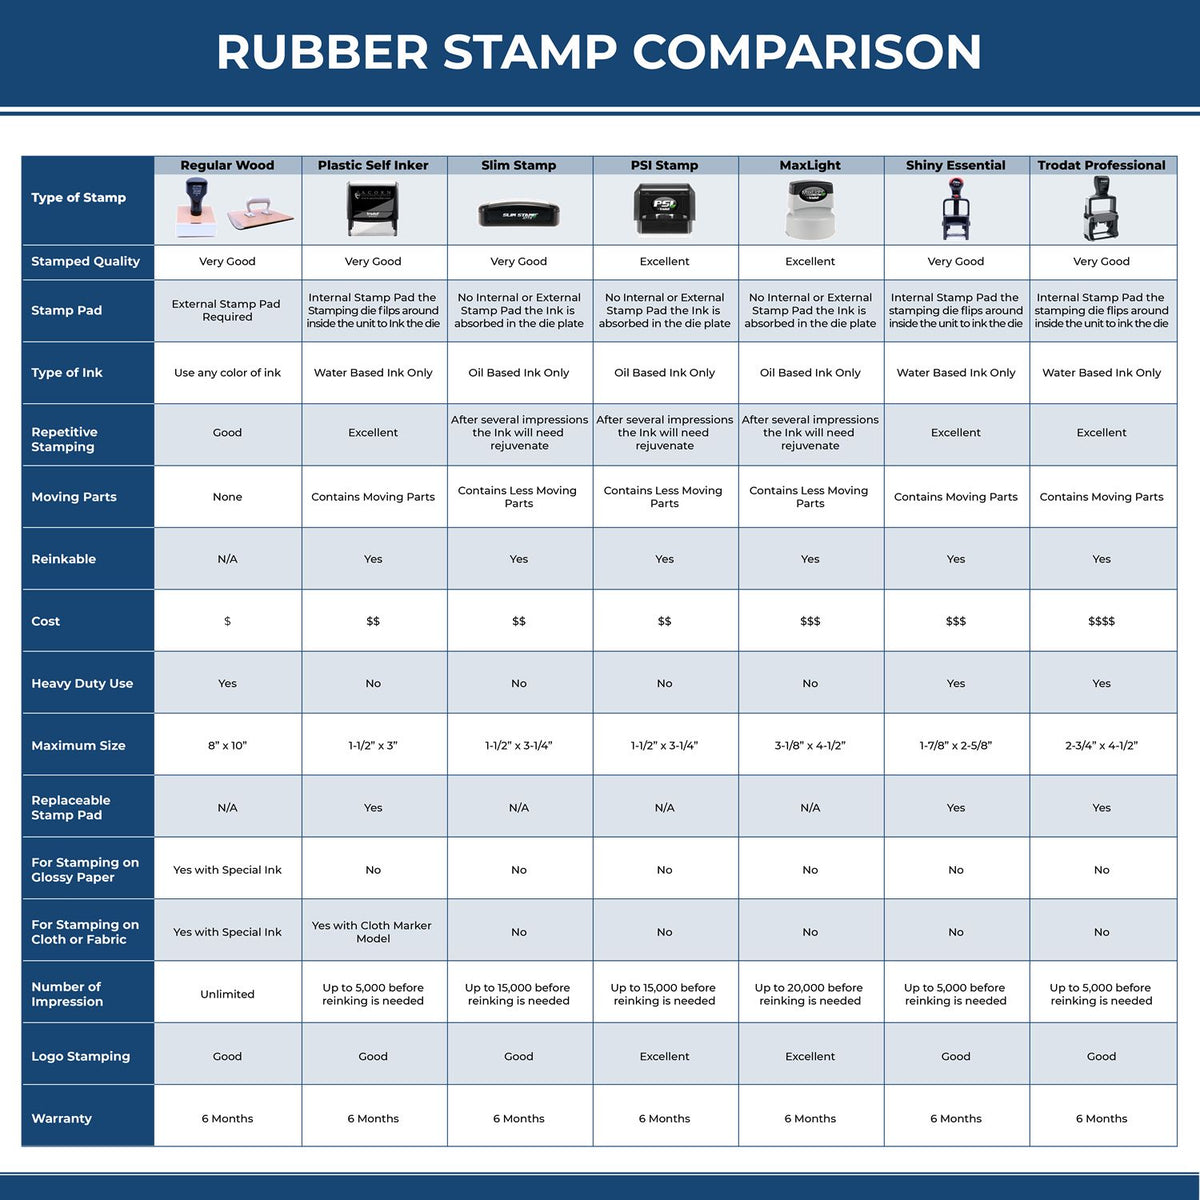 Large Paid with Checkmark Rubber Stamp 5651R Rubber Stamp Comparison